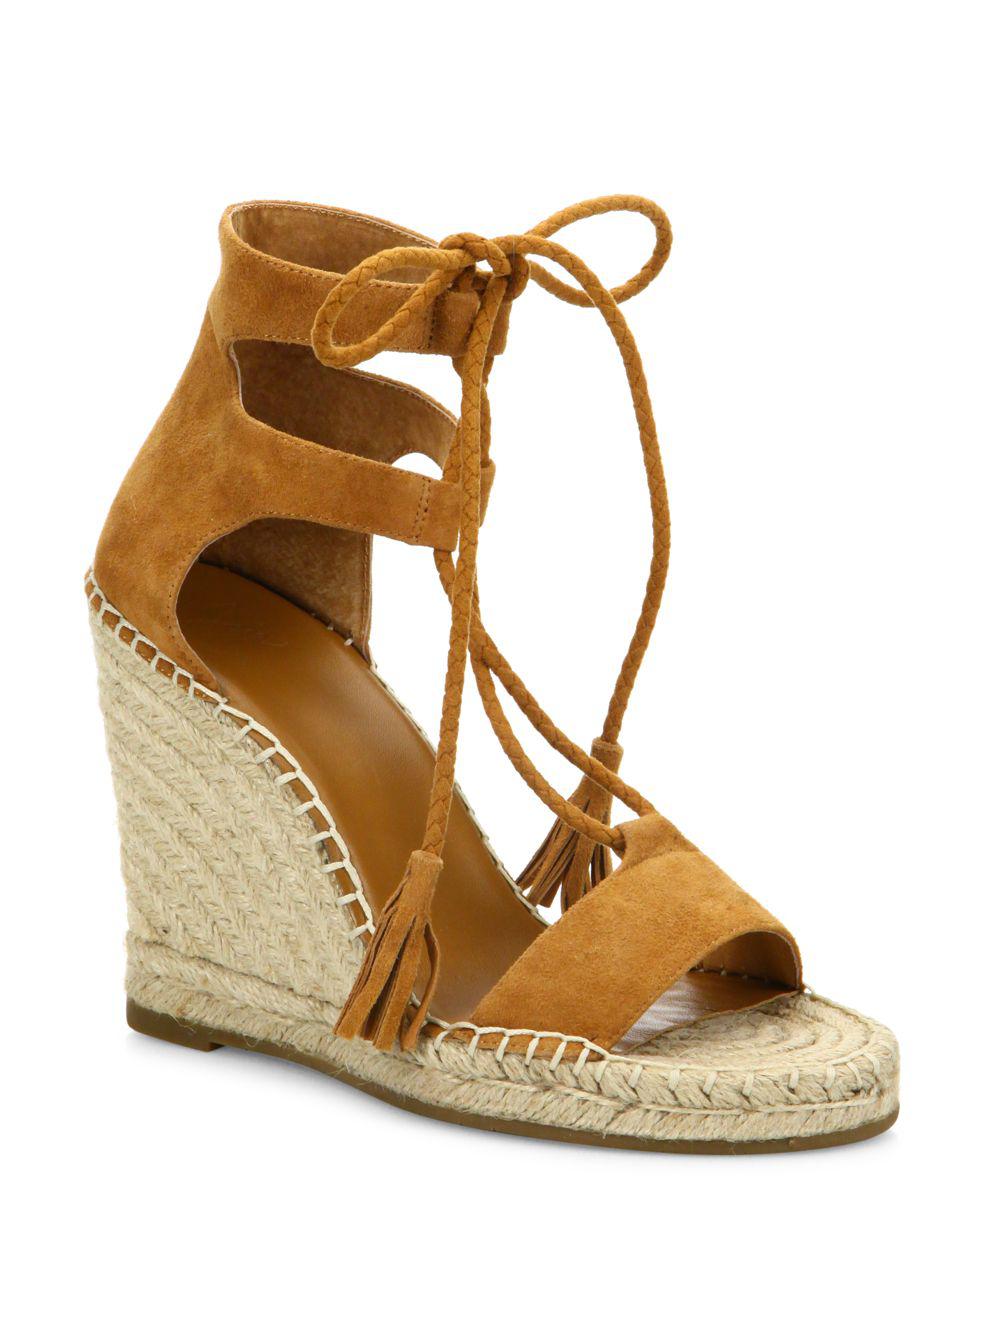 Lyst - Joie Delilah Lace-up Suede Espadrille Wedge Sandals in Brown ...